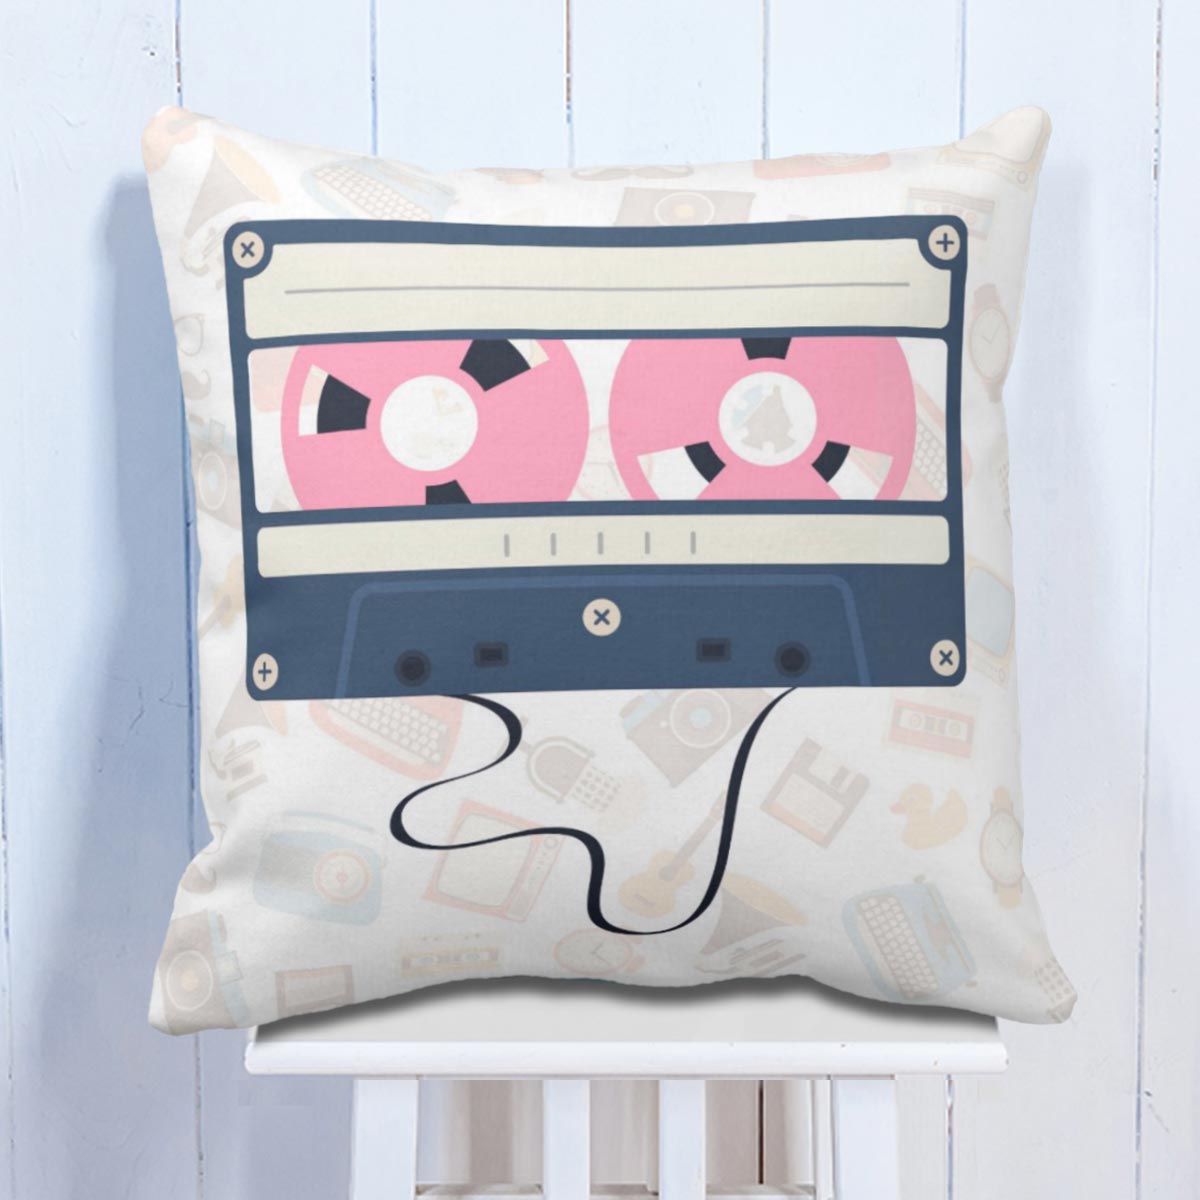 Retro With Cassette  Cushion